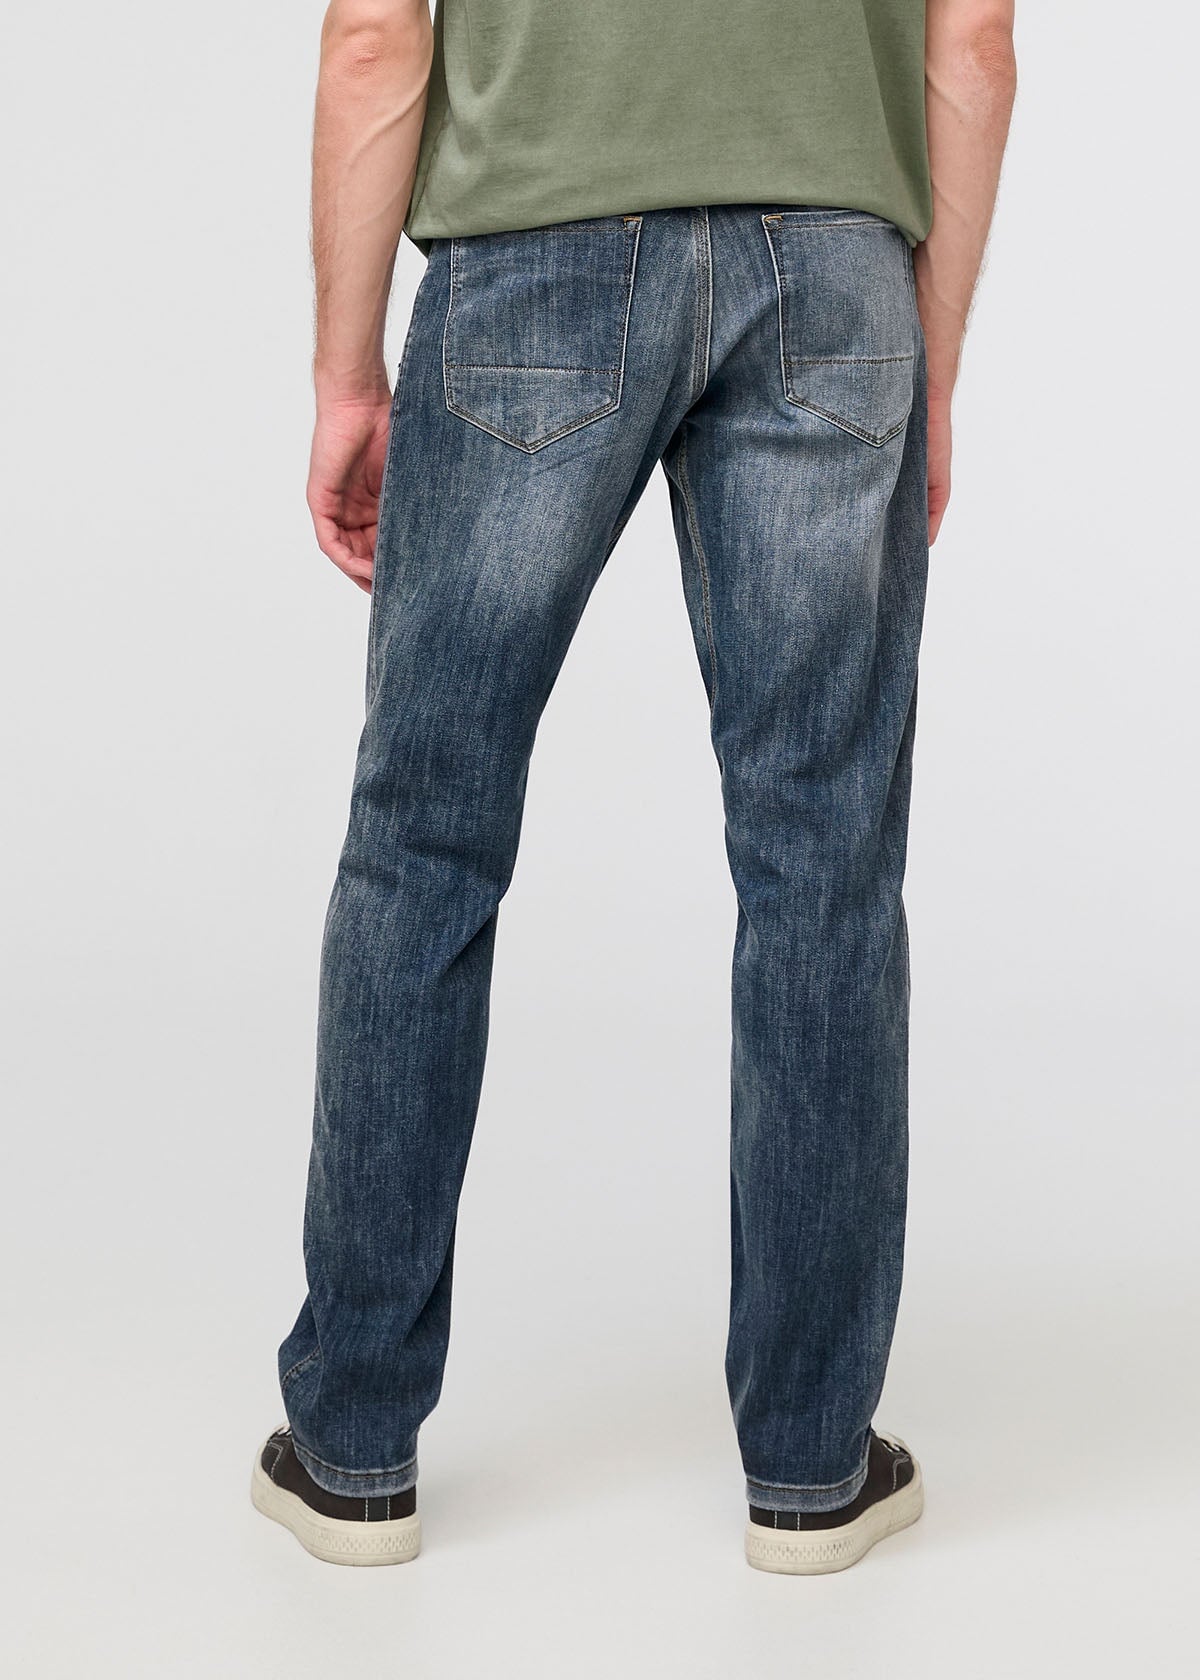 Men's Blue Athletic Straight Fit Stretch Jeans